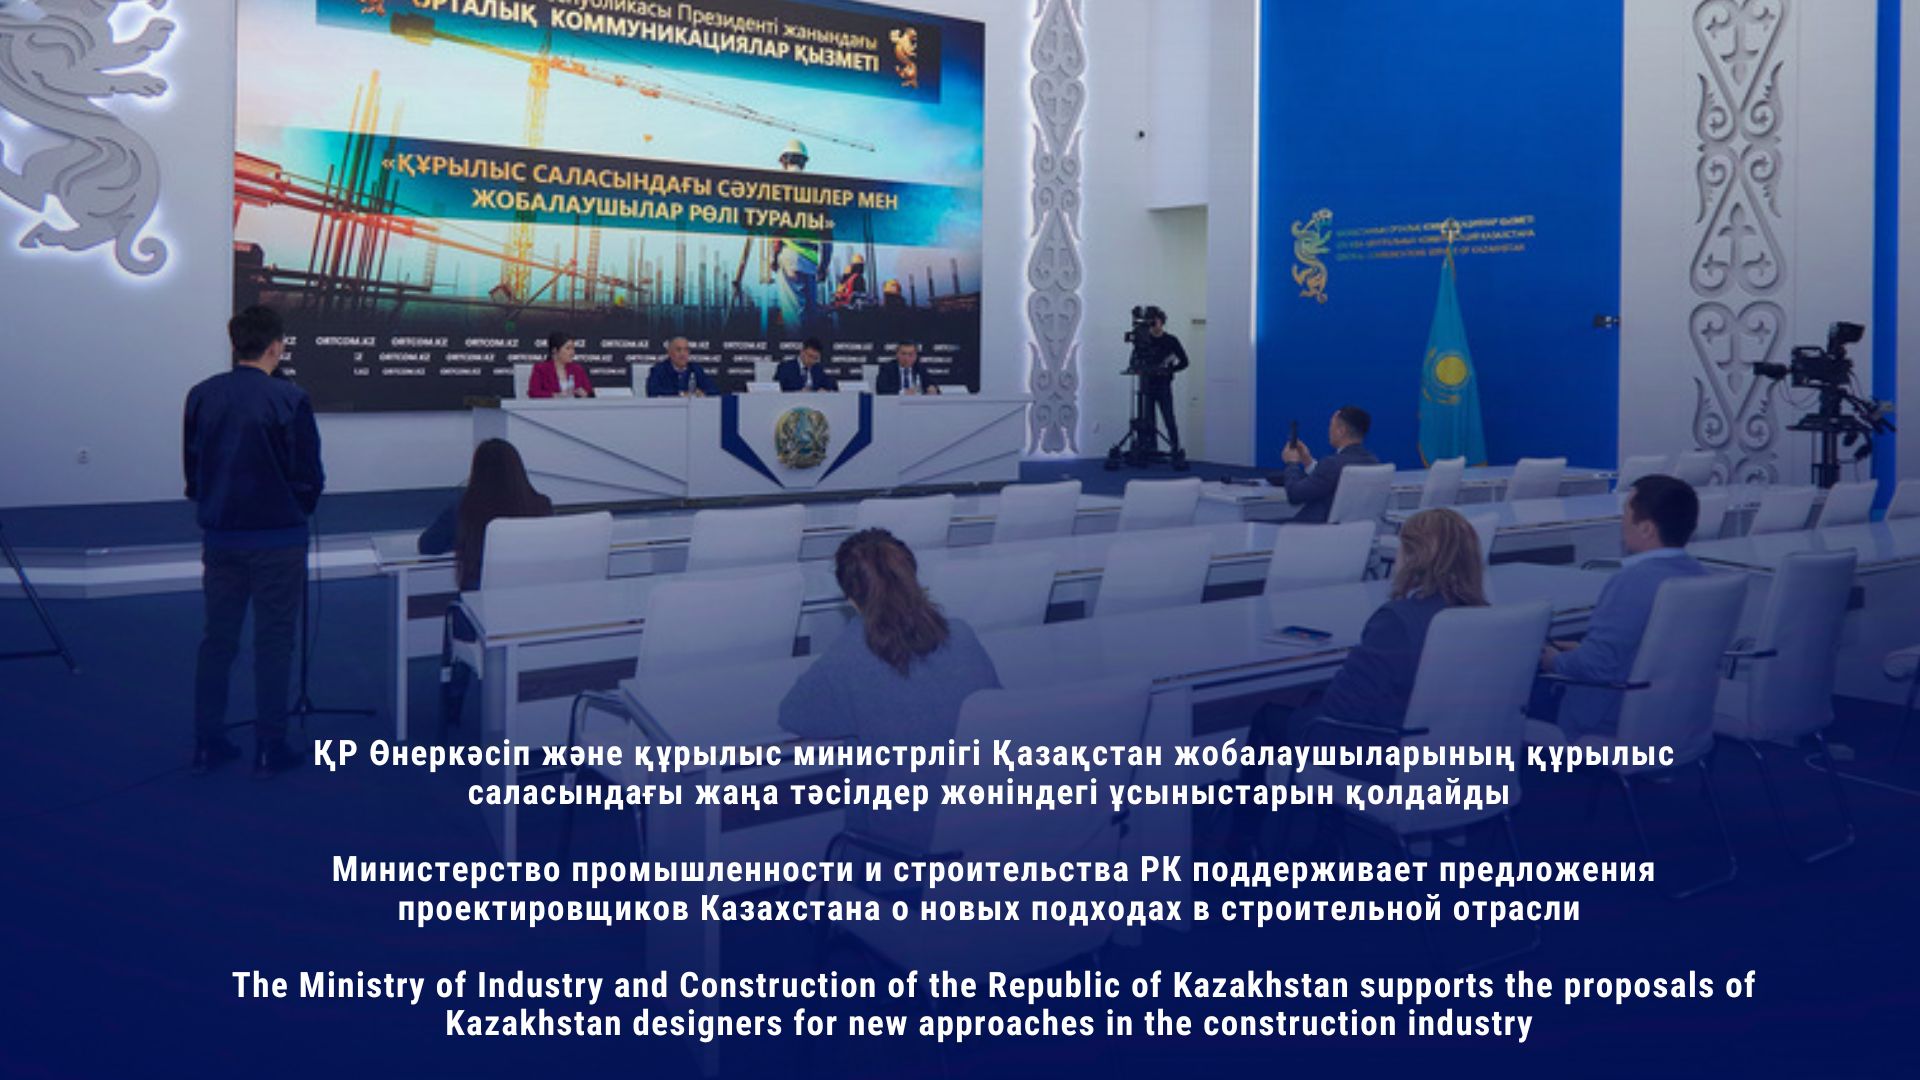 The Ministry of Industry and Construction of the Republic of Kazakhstan supports the proposals of Kazakhstan designers for new approaches in the construction industry